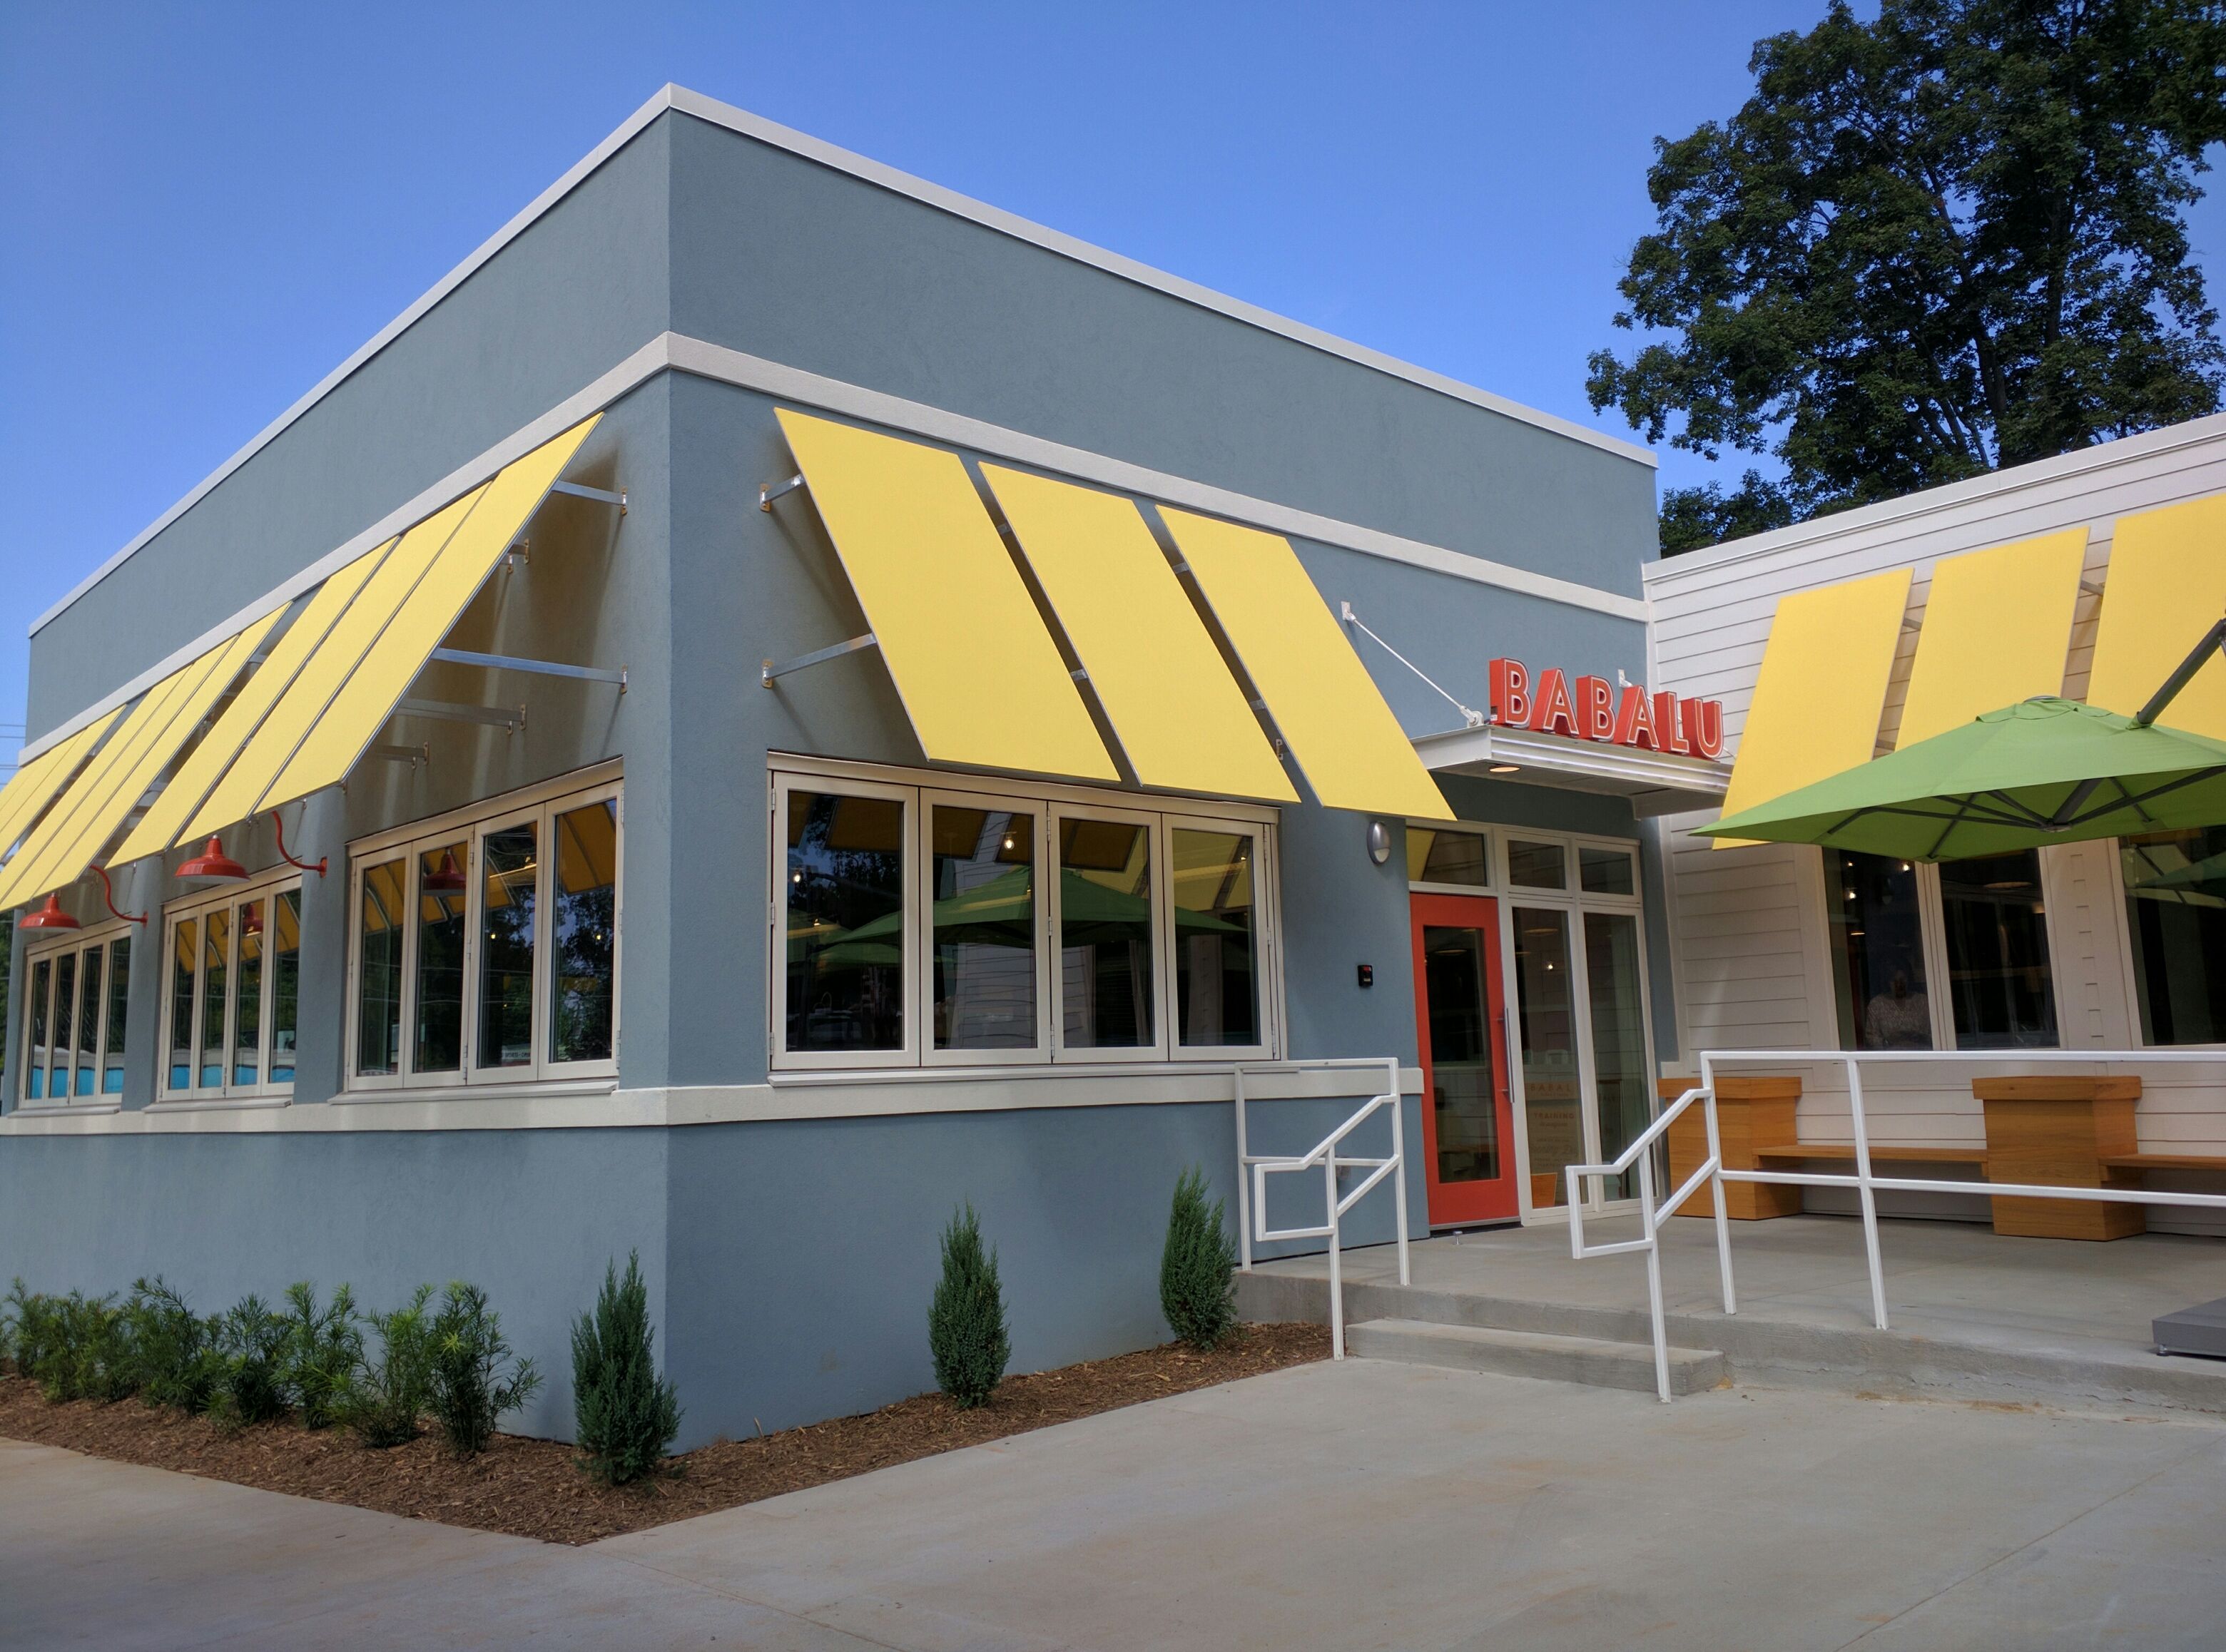 Babalu Tapas & Tacos is located in the historic Dilworth neighborhood of Charlotte